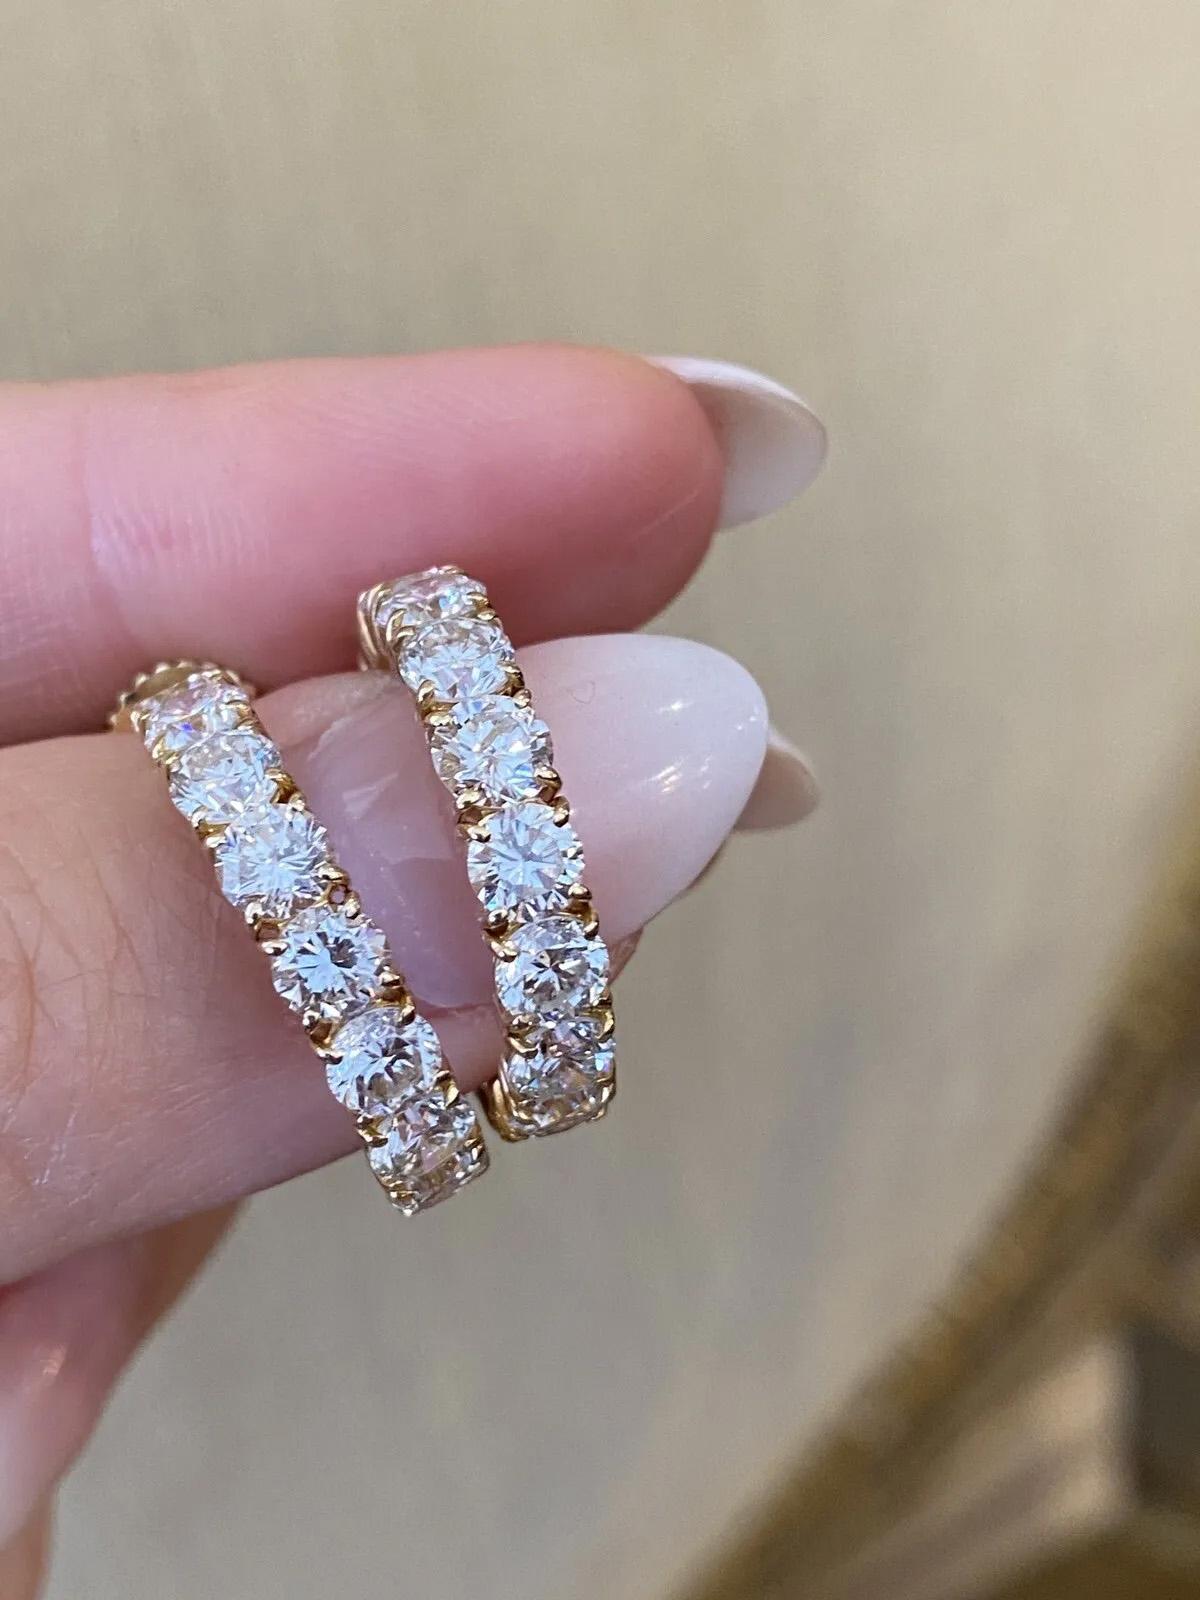 7.44 Carats Total Weight Diamond Hoop Earrings in 18k Yellow Gold

Diamond Hoop Earrings feature one Row of Round Brilliant cut Diamond with 12 Diamond on each hoop set in 18k Yellow Gold. Earrings have posts with butterfly backs.

There are a total